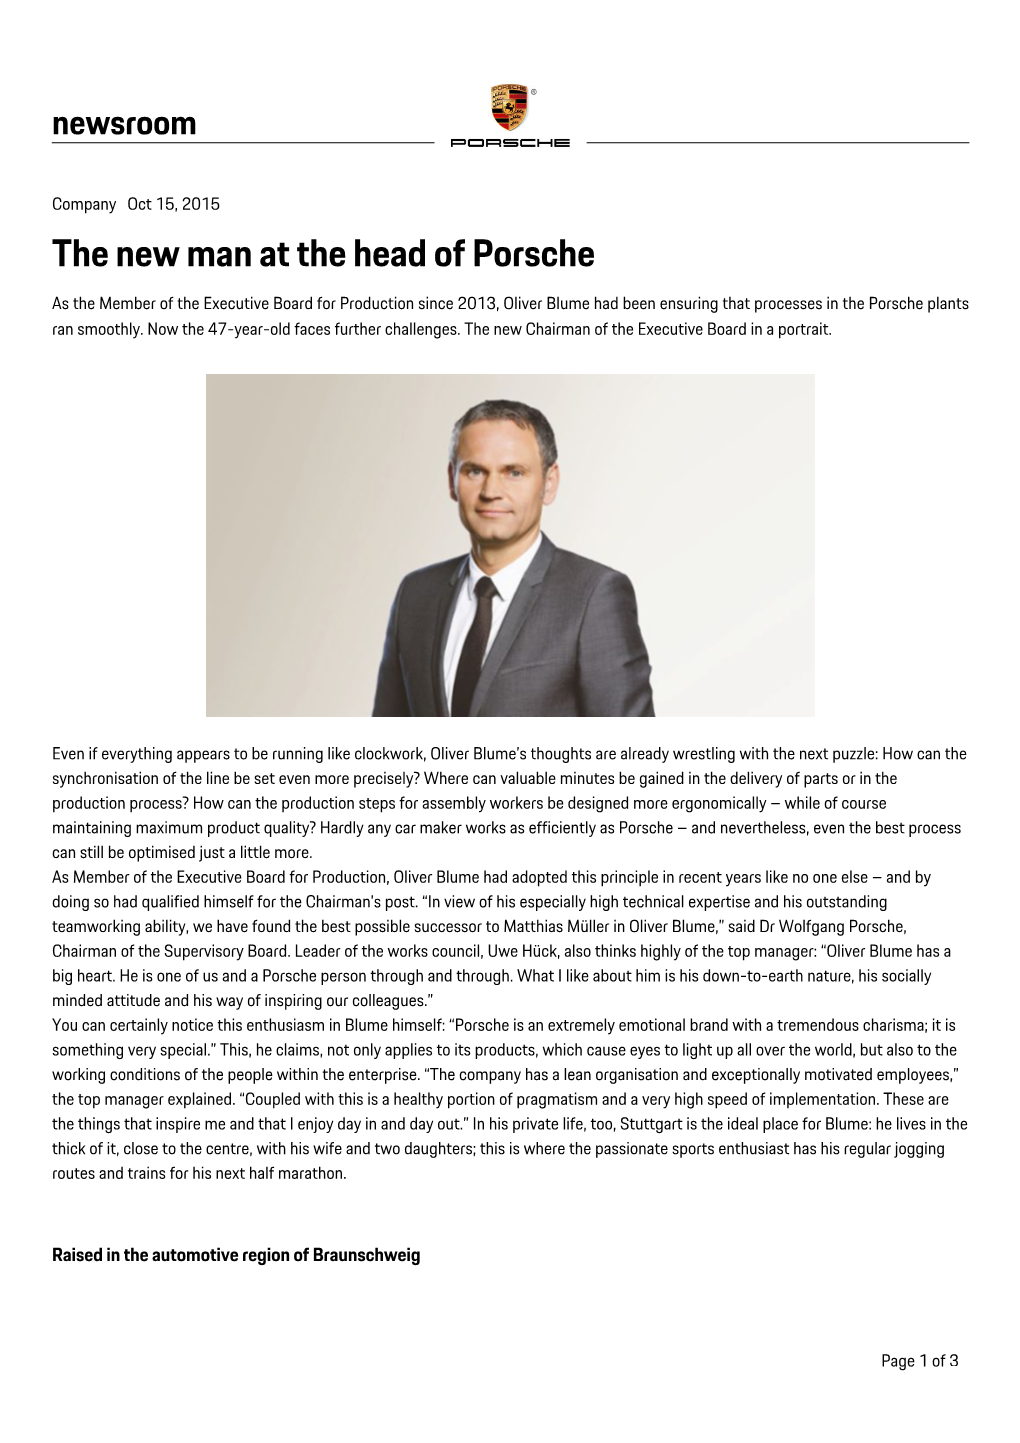 The New Man at the Head of Porsche